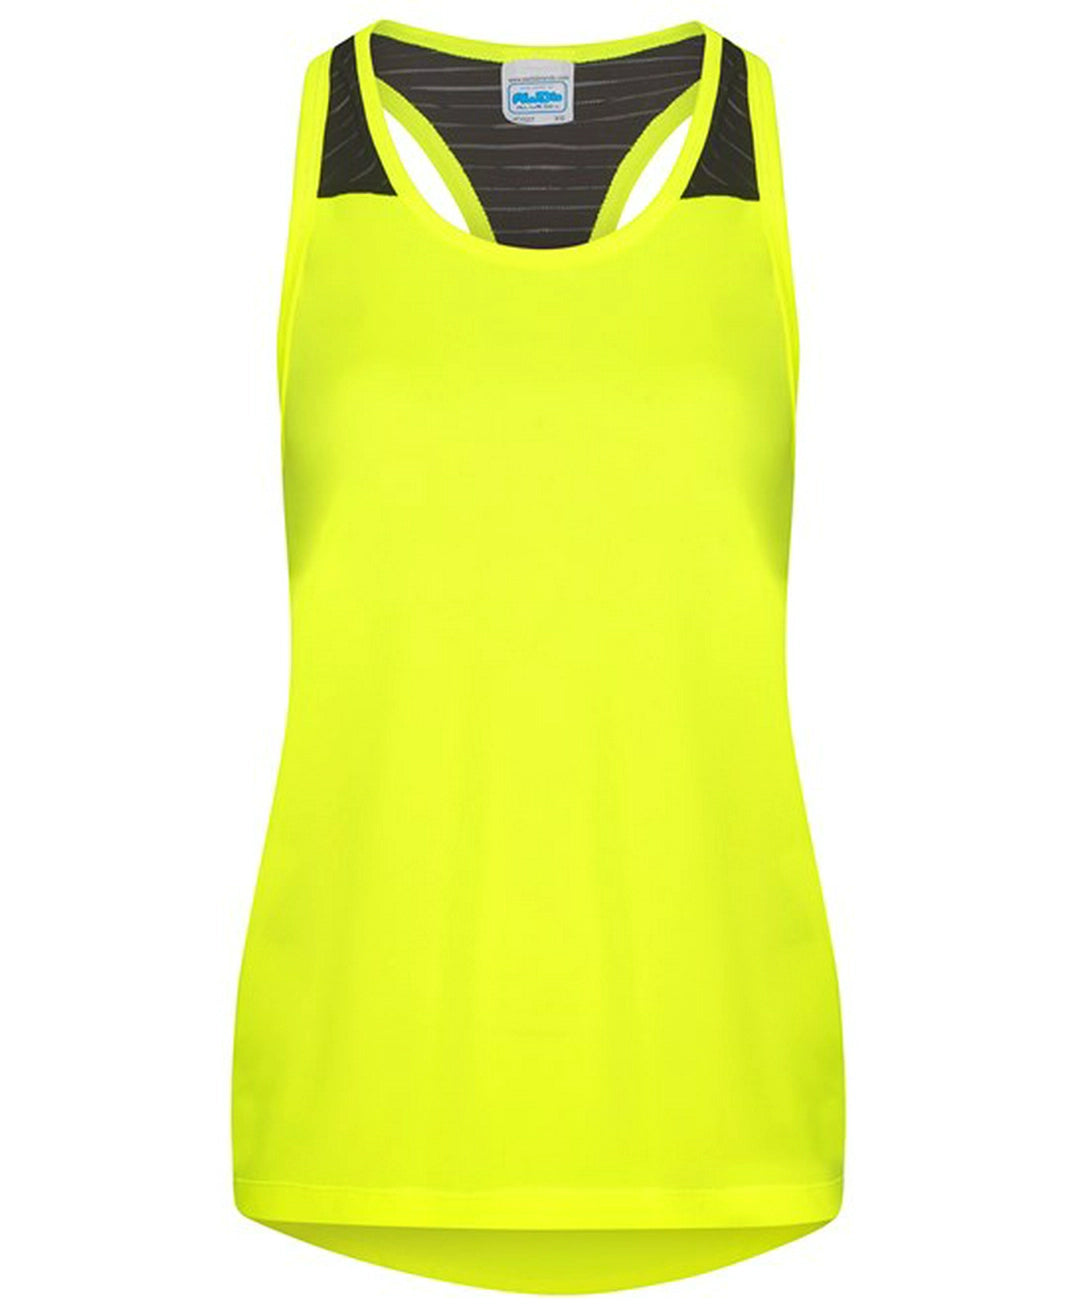 AWDis JC027 Just Cool Girlie Smooth Workout Vest - COOZO